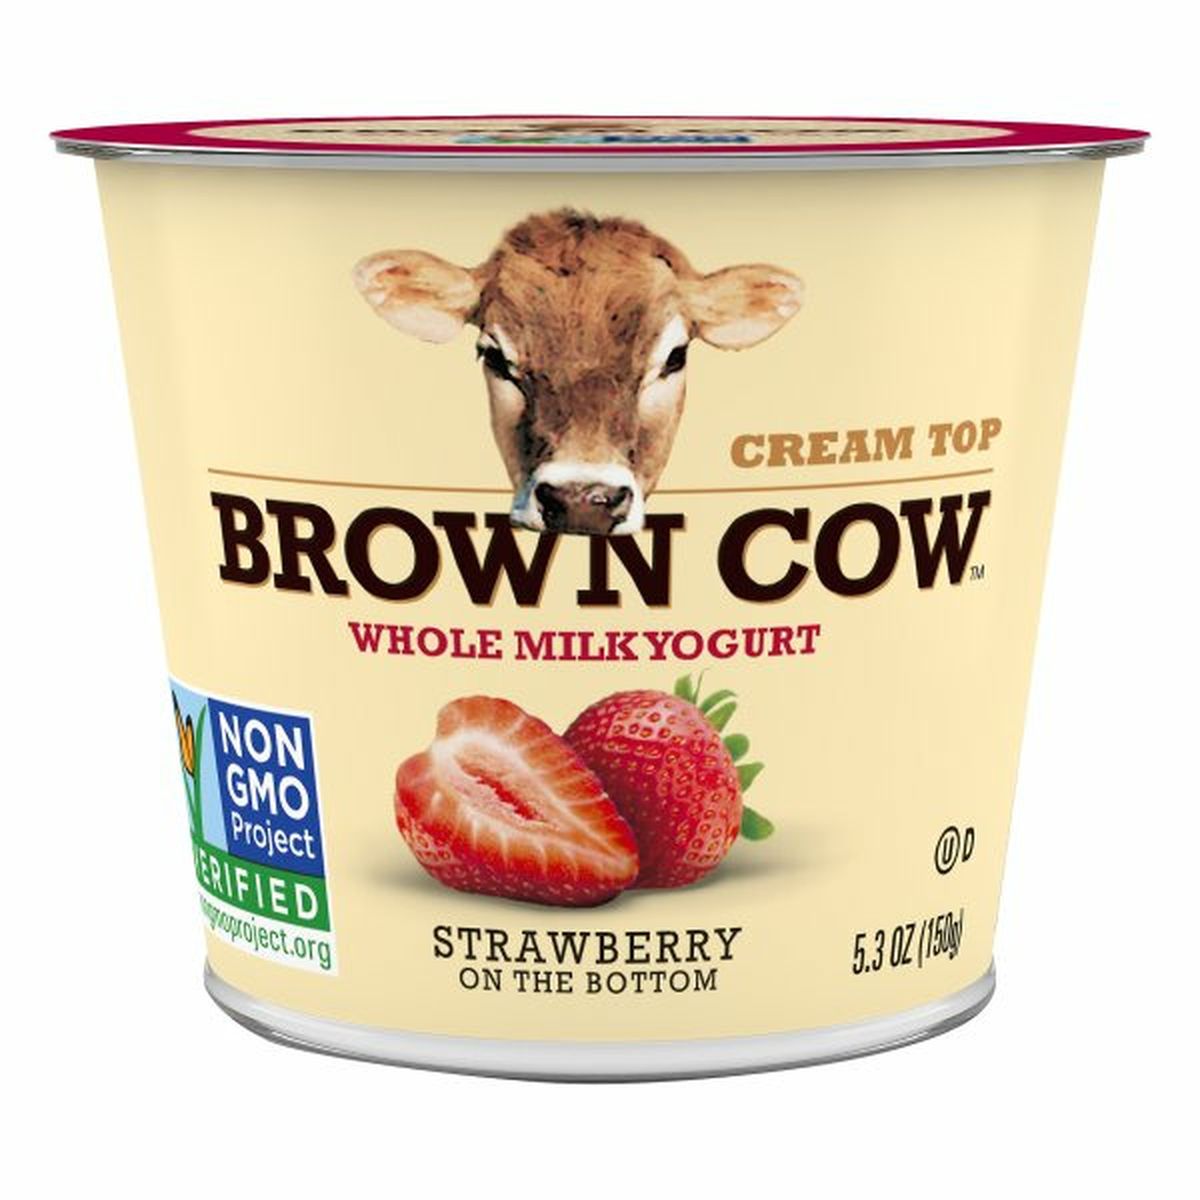 Calories in Brown Cows Cream Top Yogurt, Whole Milk, Strawberry on the Bottom